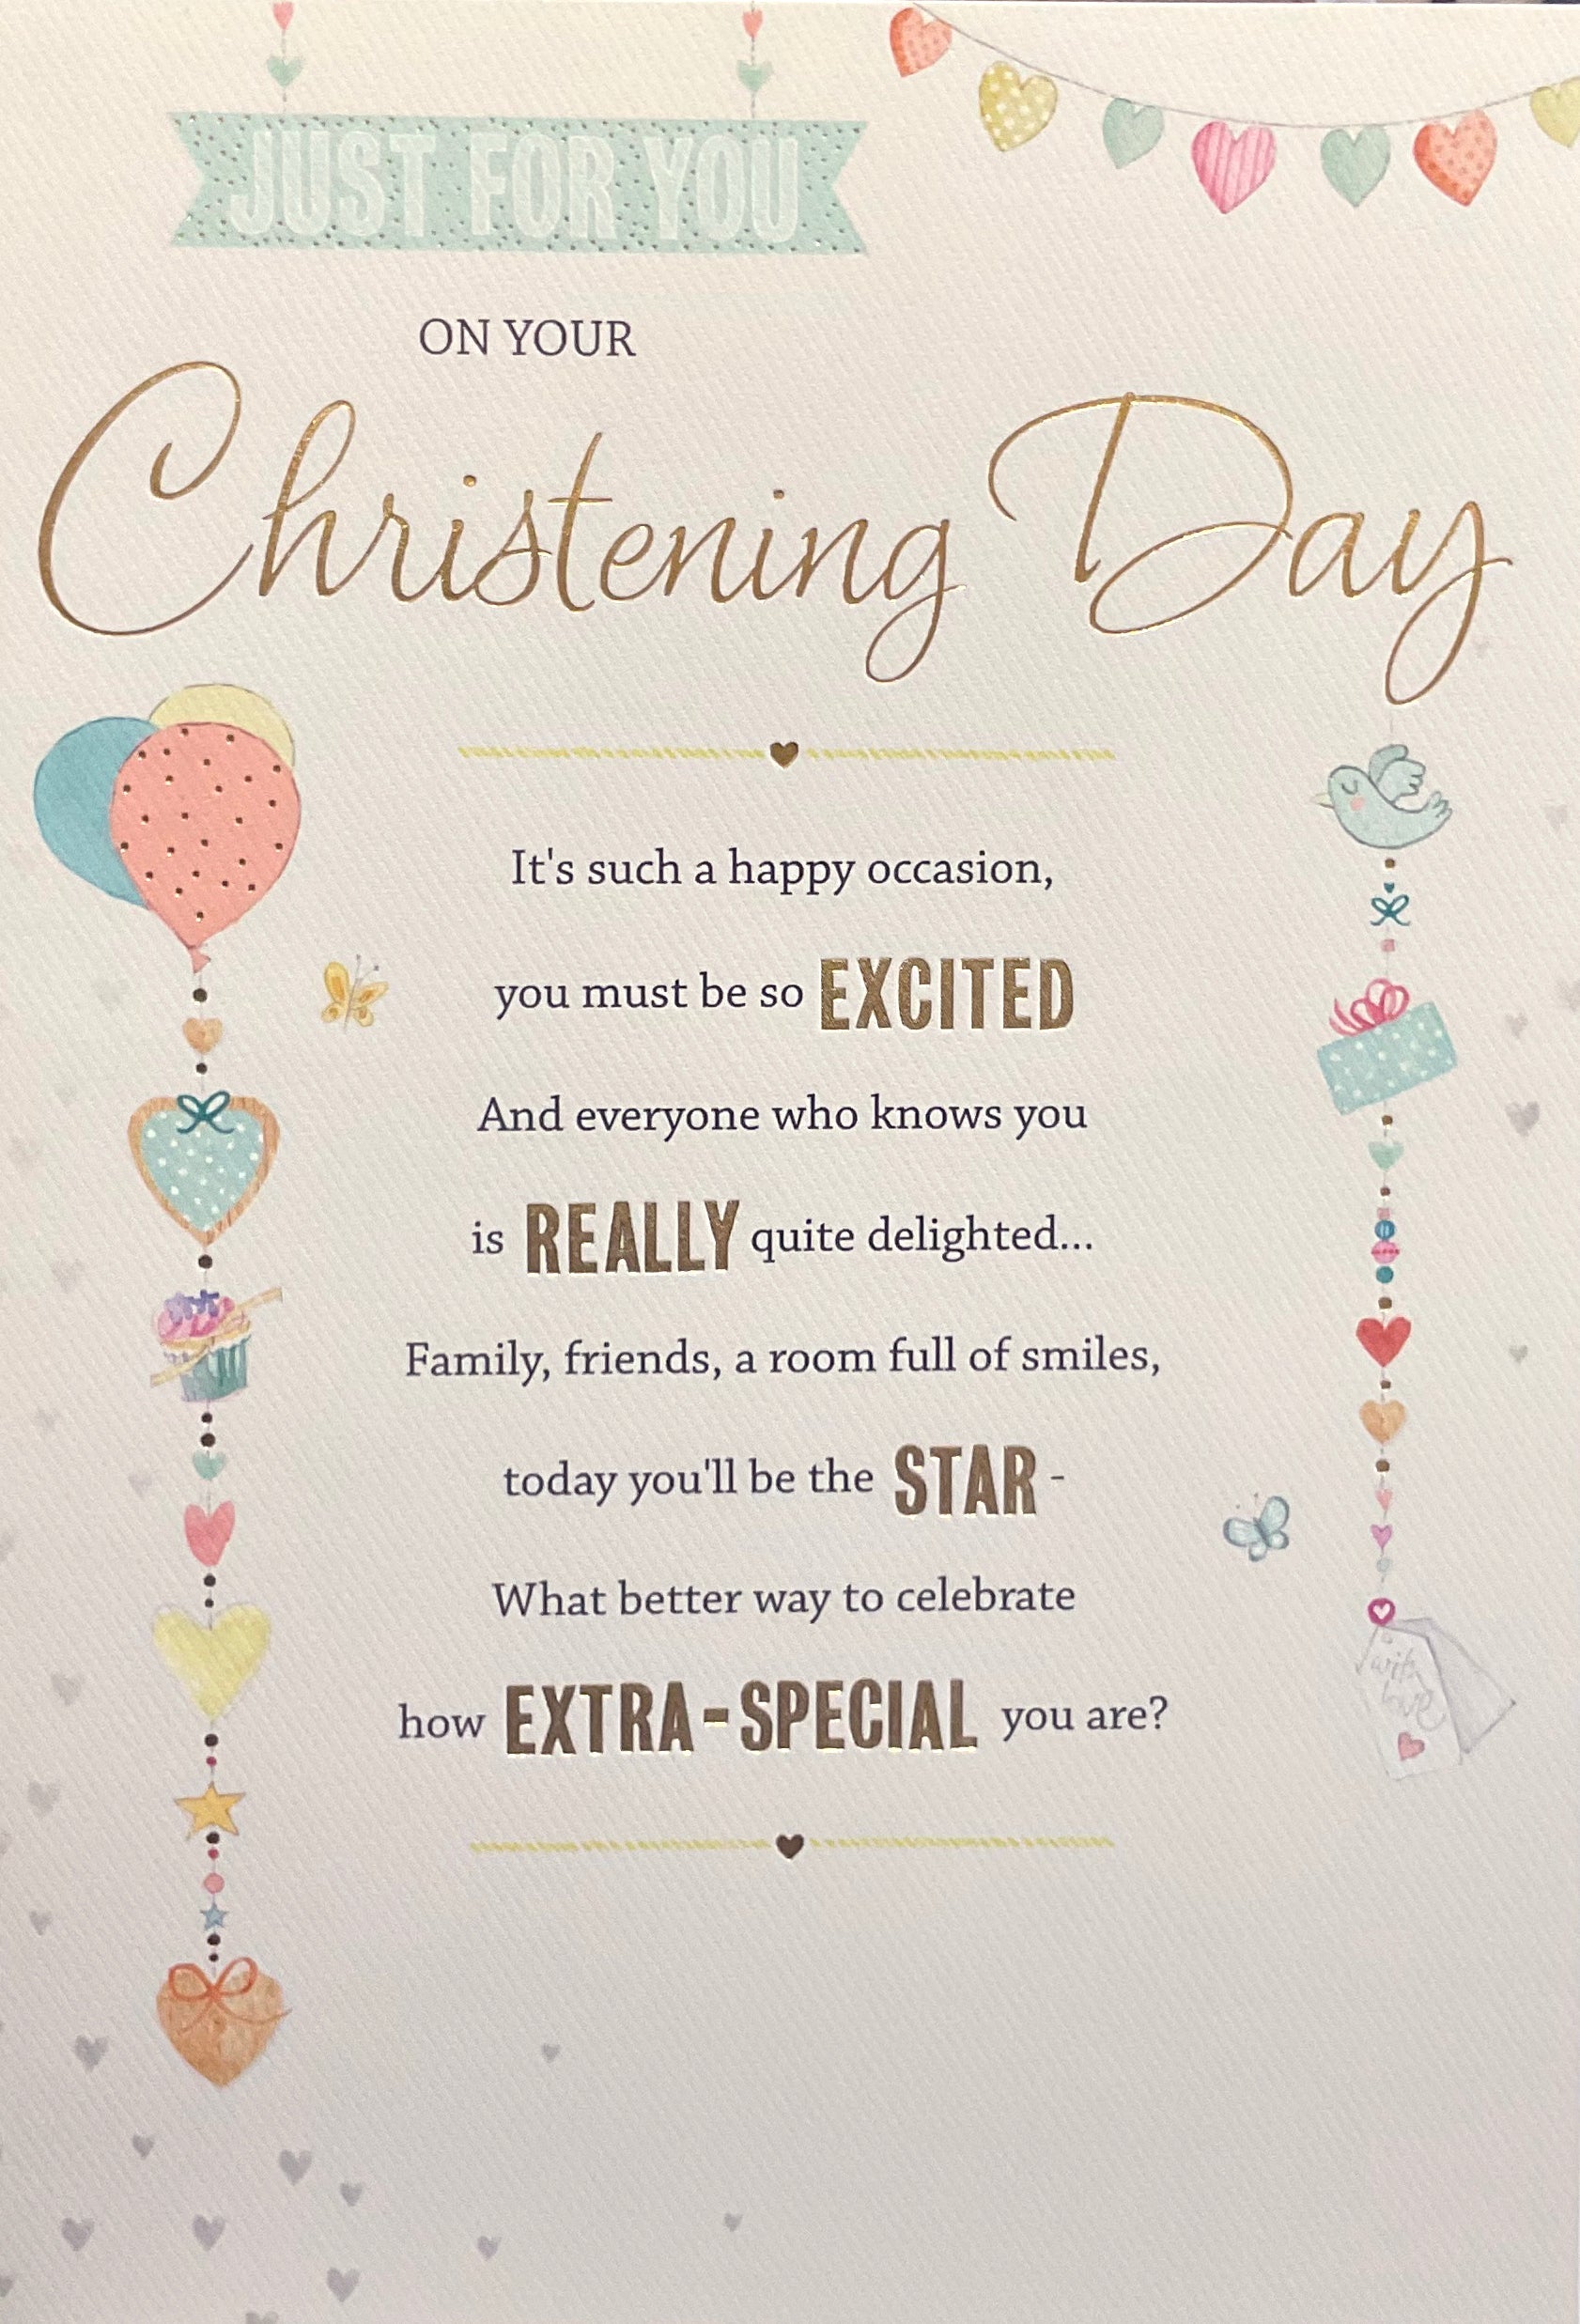 Christening Card - The Star Extra Special You